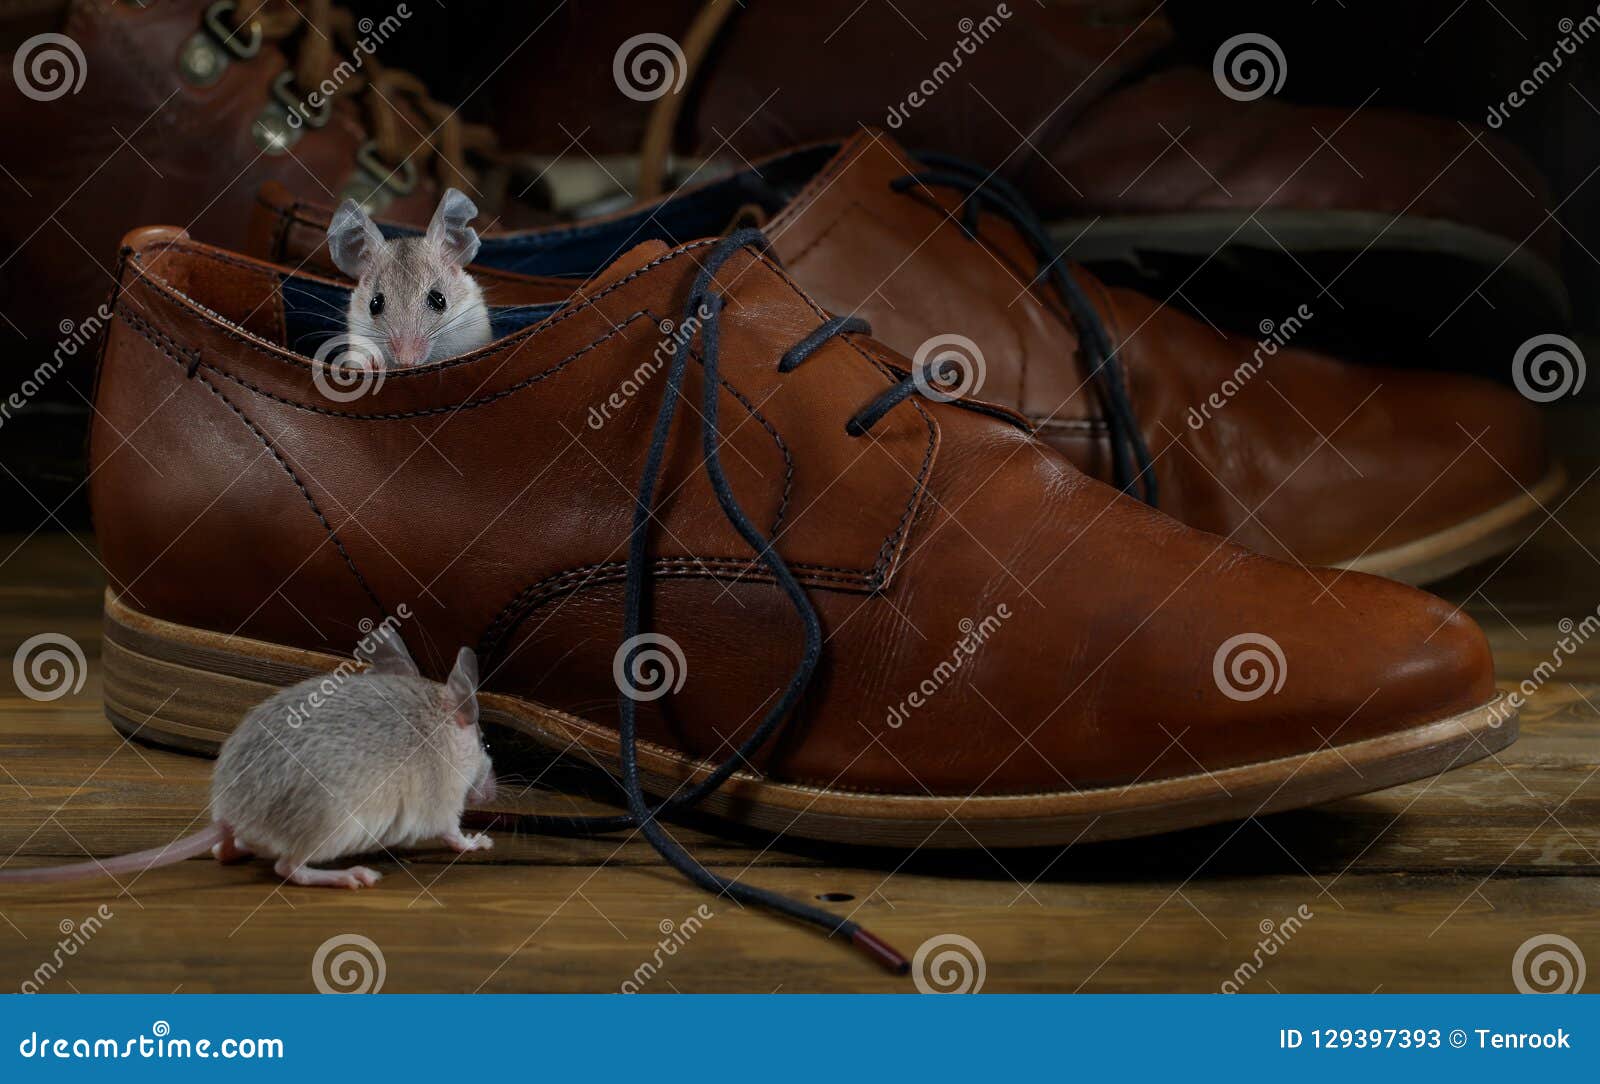 Close Up Two Mice And Leather Brown Shoes On The Wooden Floors